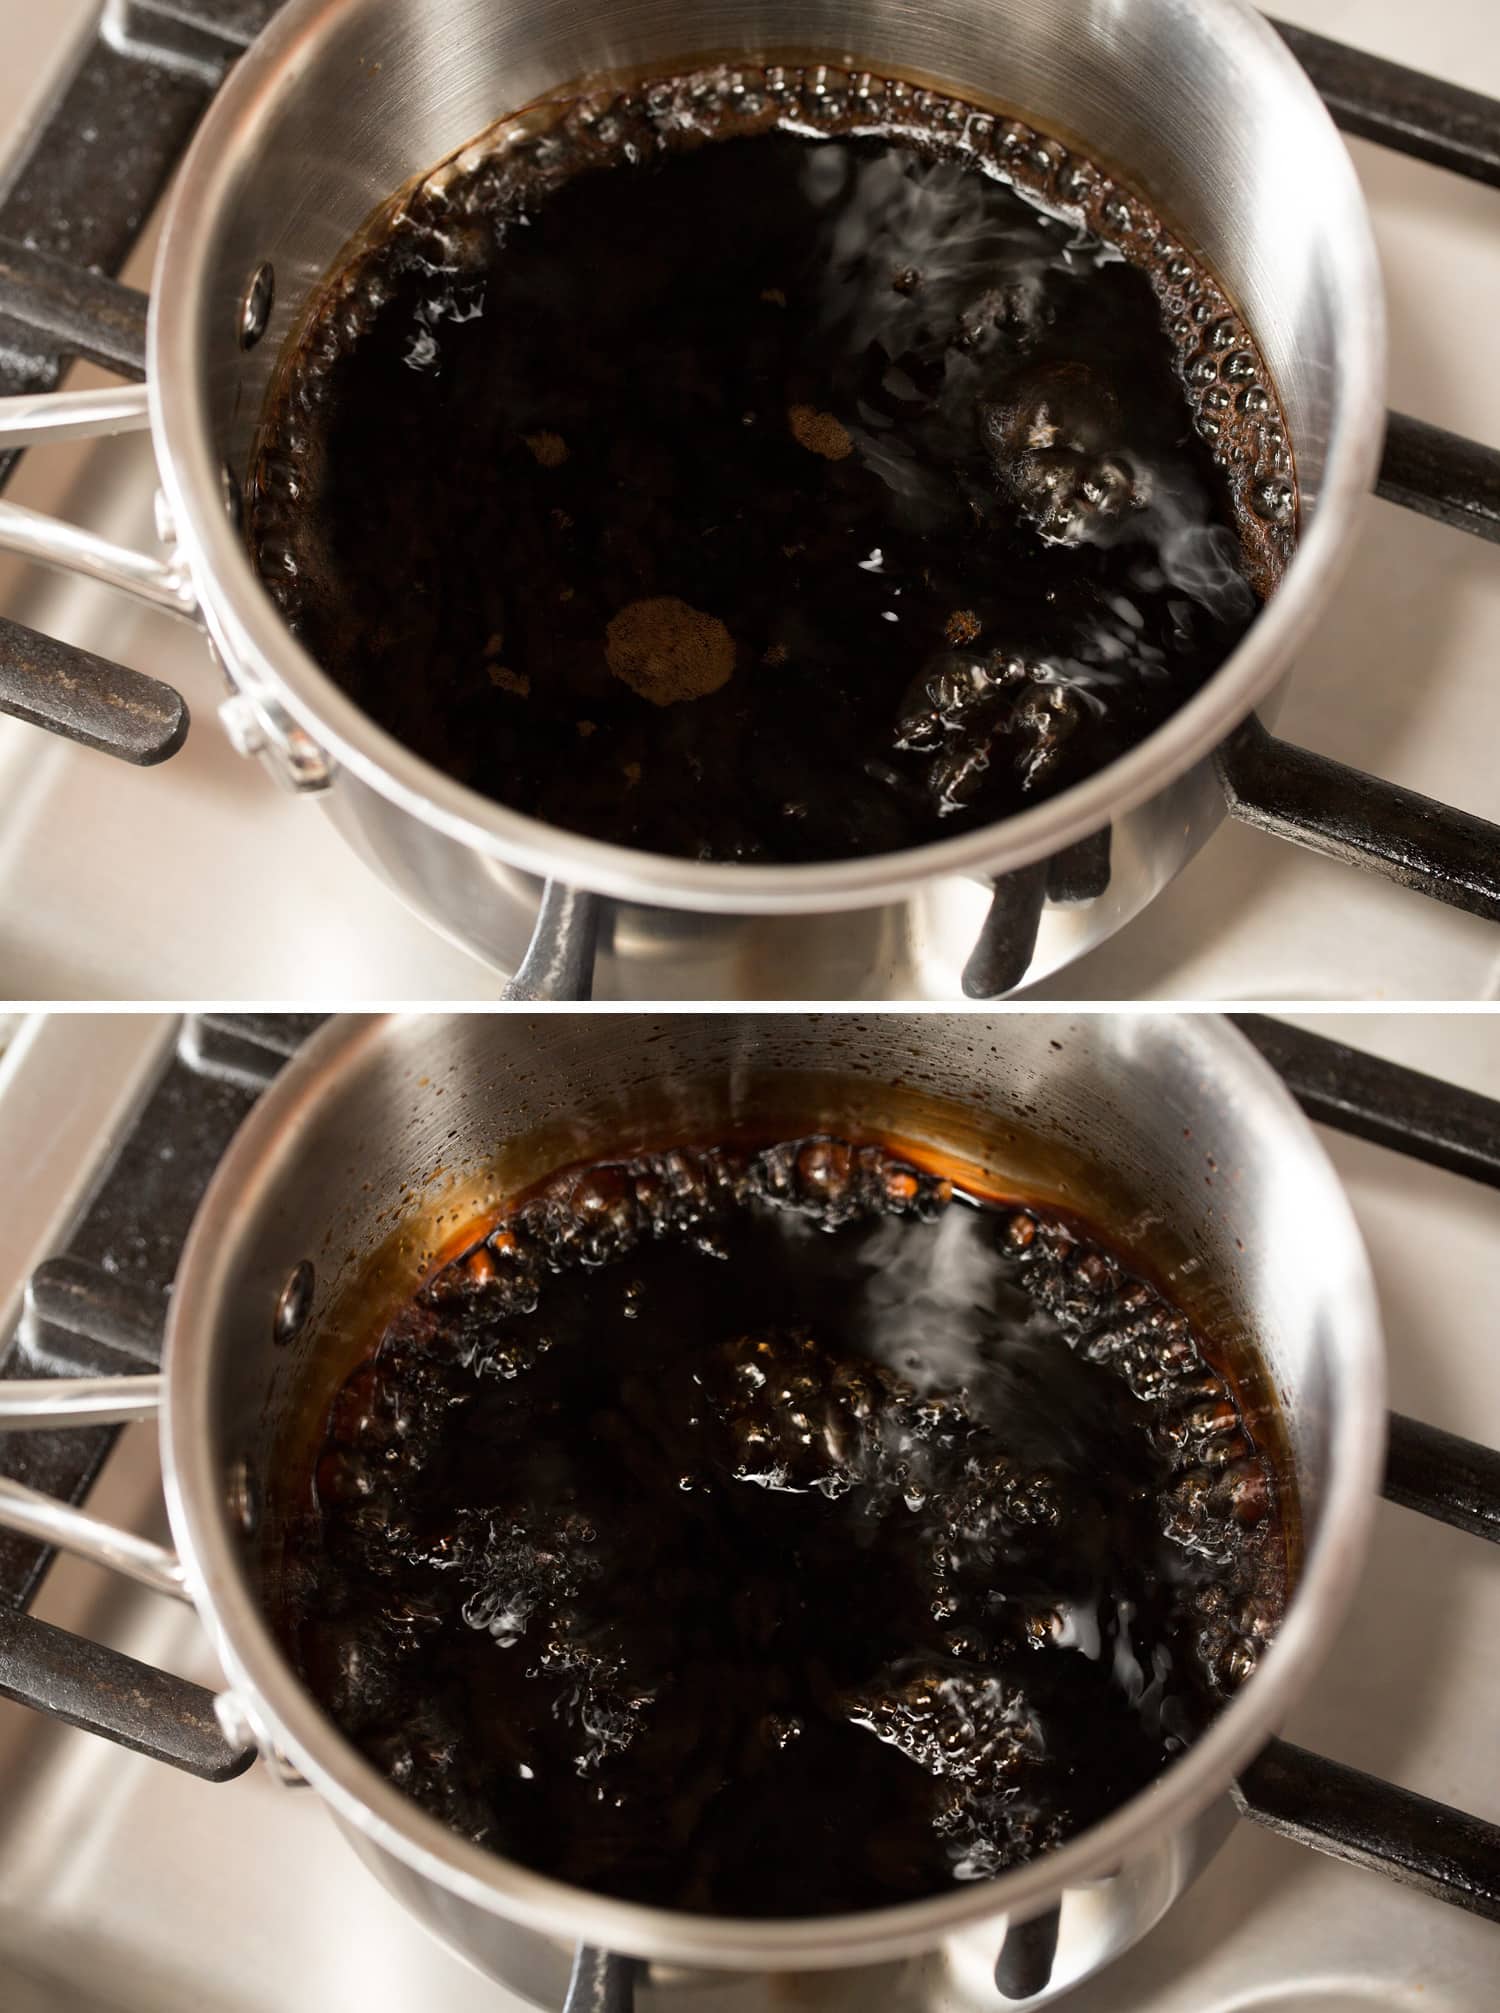 Showing how to simmer balsamic vinegar in a saucepan on the stovetop to reduce to balsamic glaze.